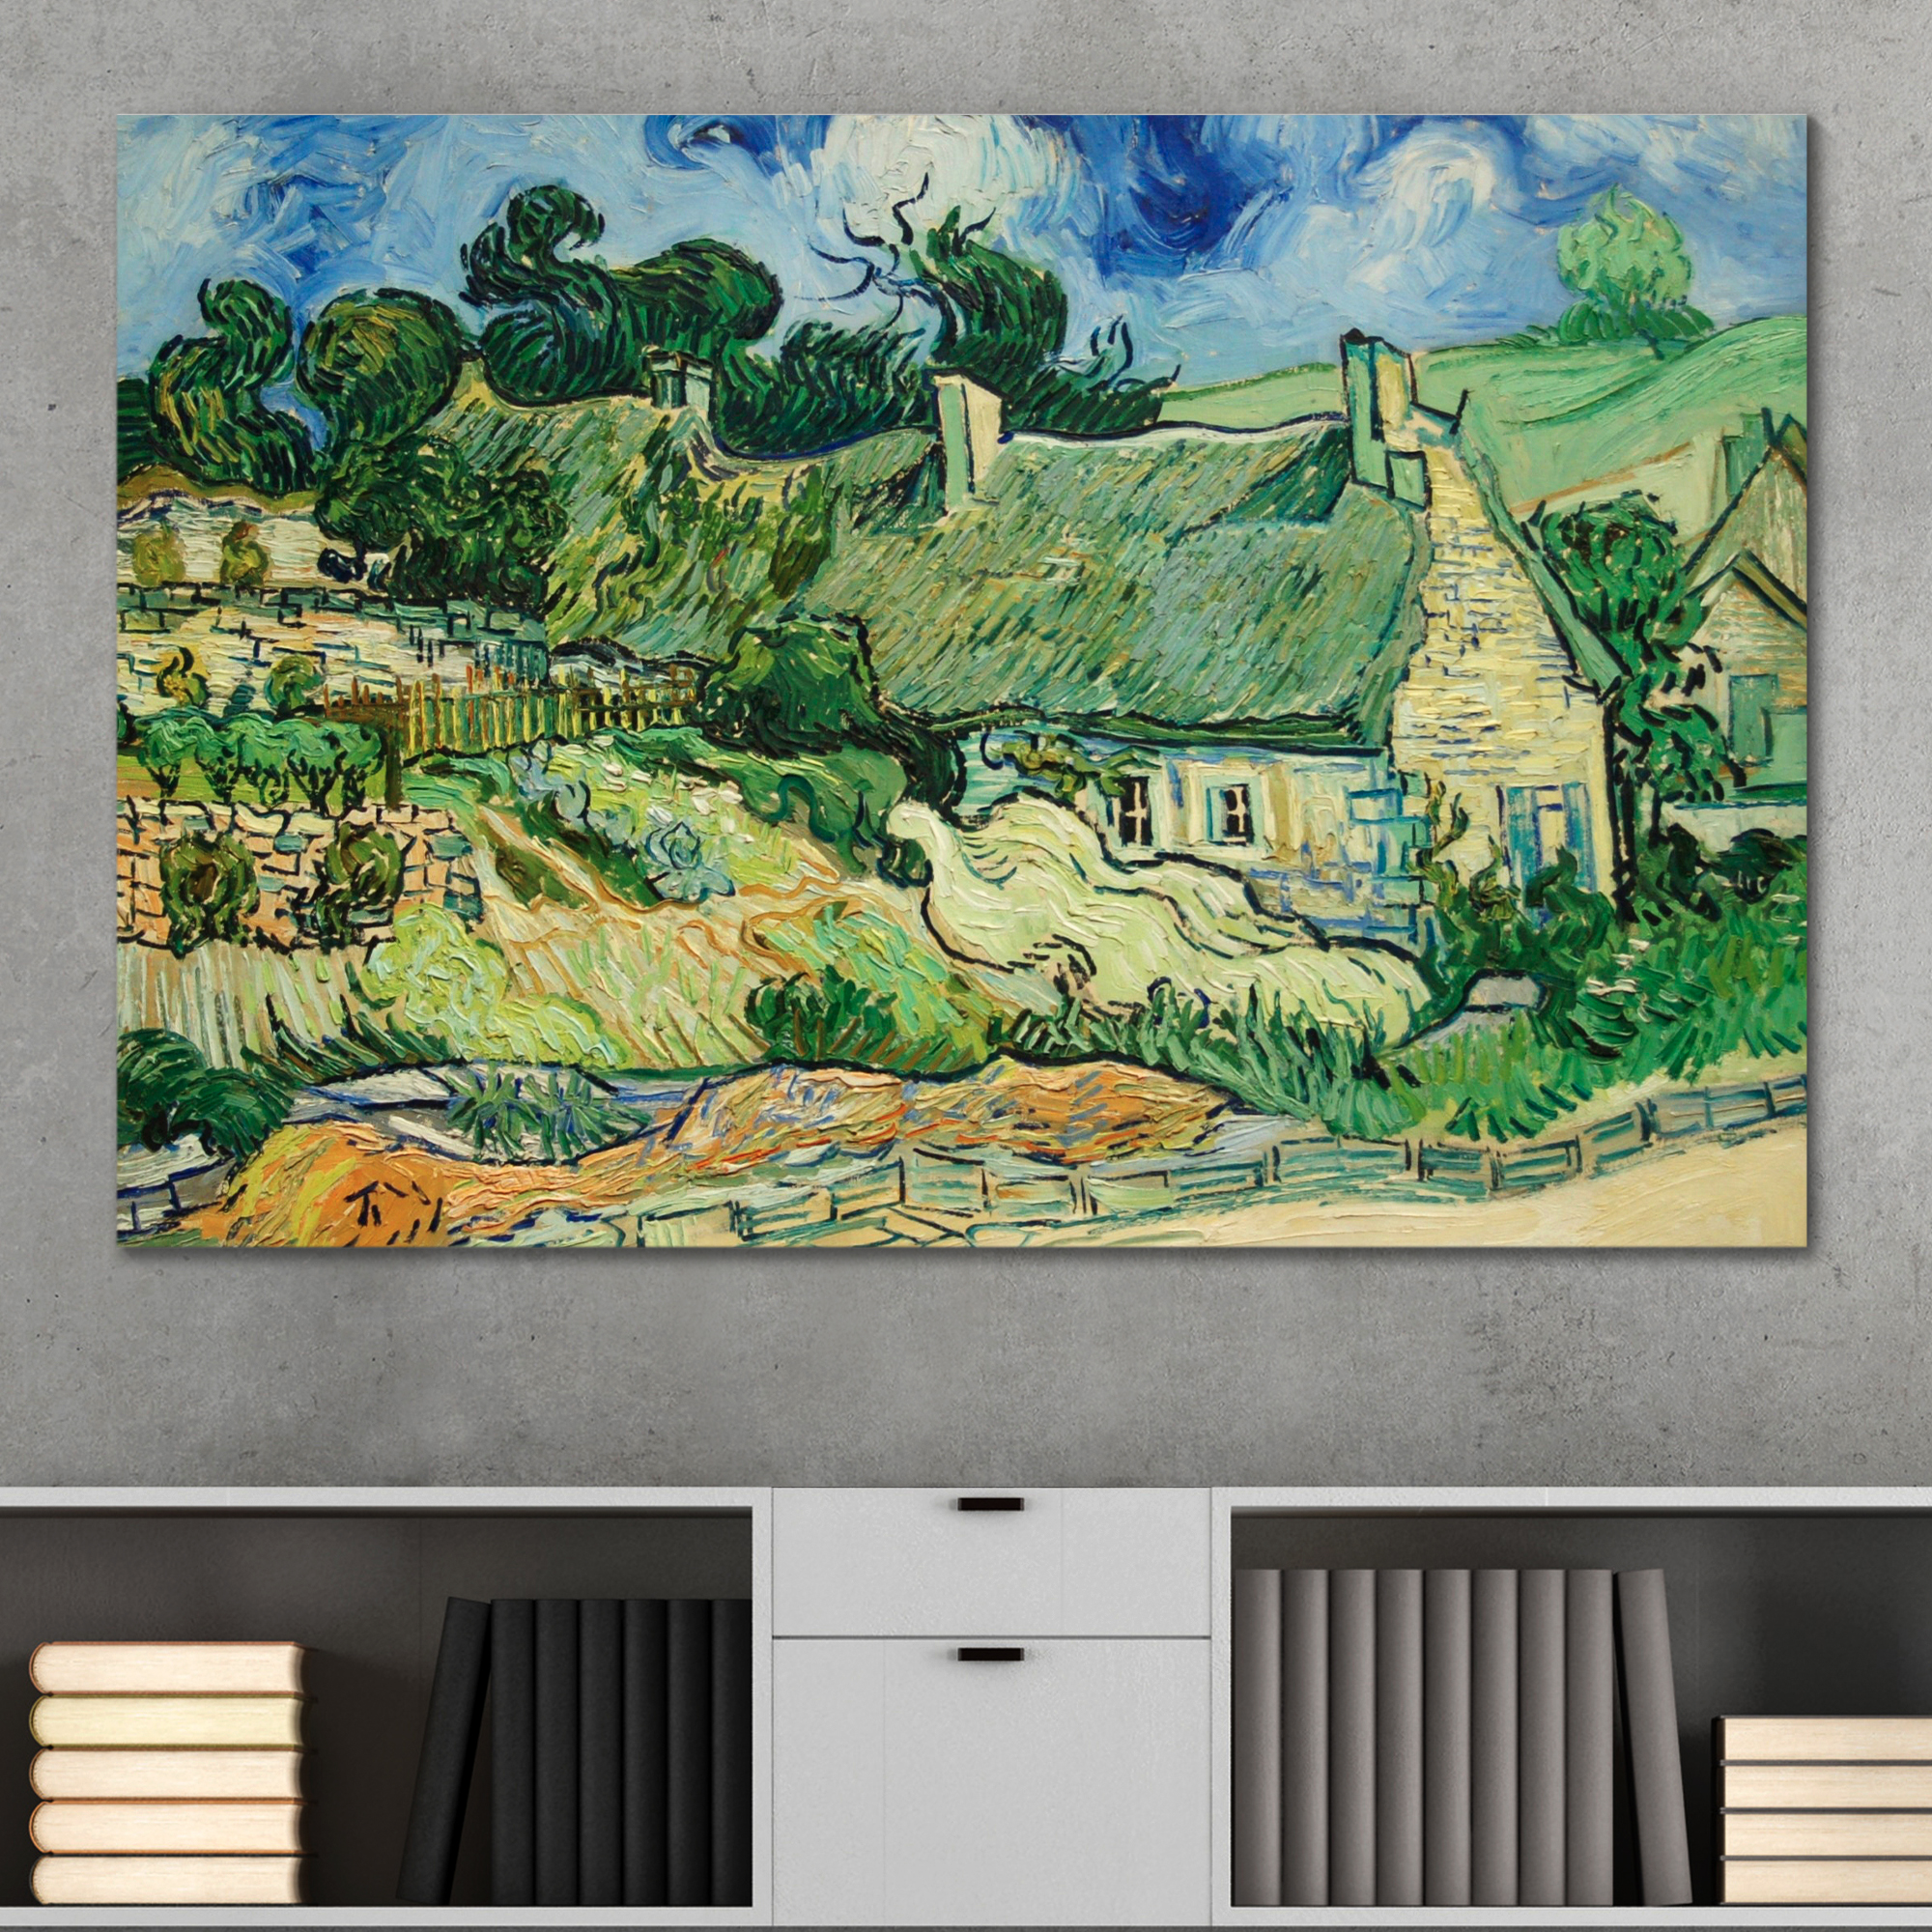 Thatched Cottages at Cordeville by Vincent Van Gogh - Canvas Print Wall Art Famous Painting Reproduction - 16